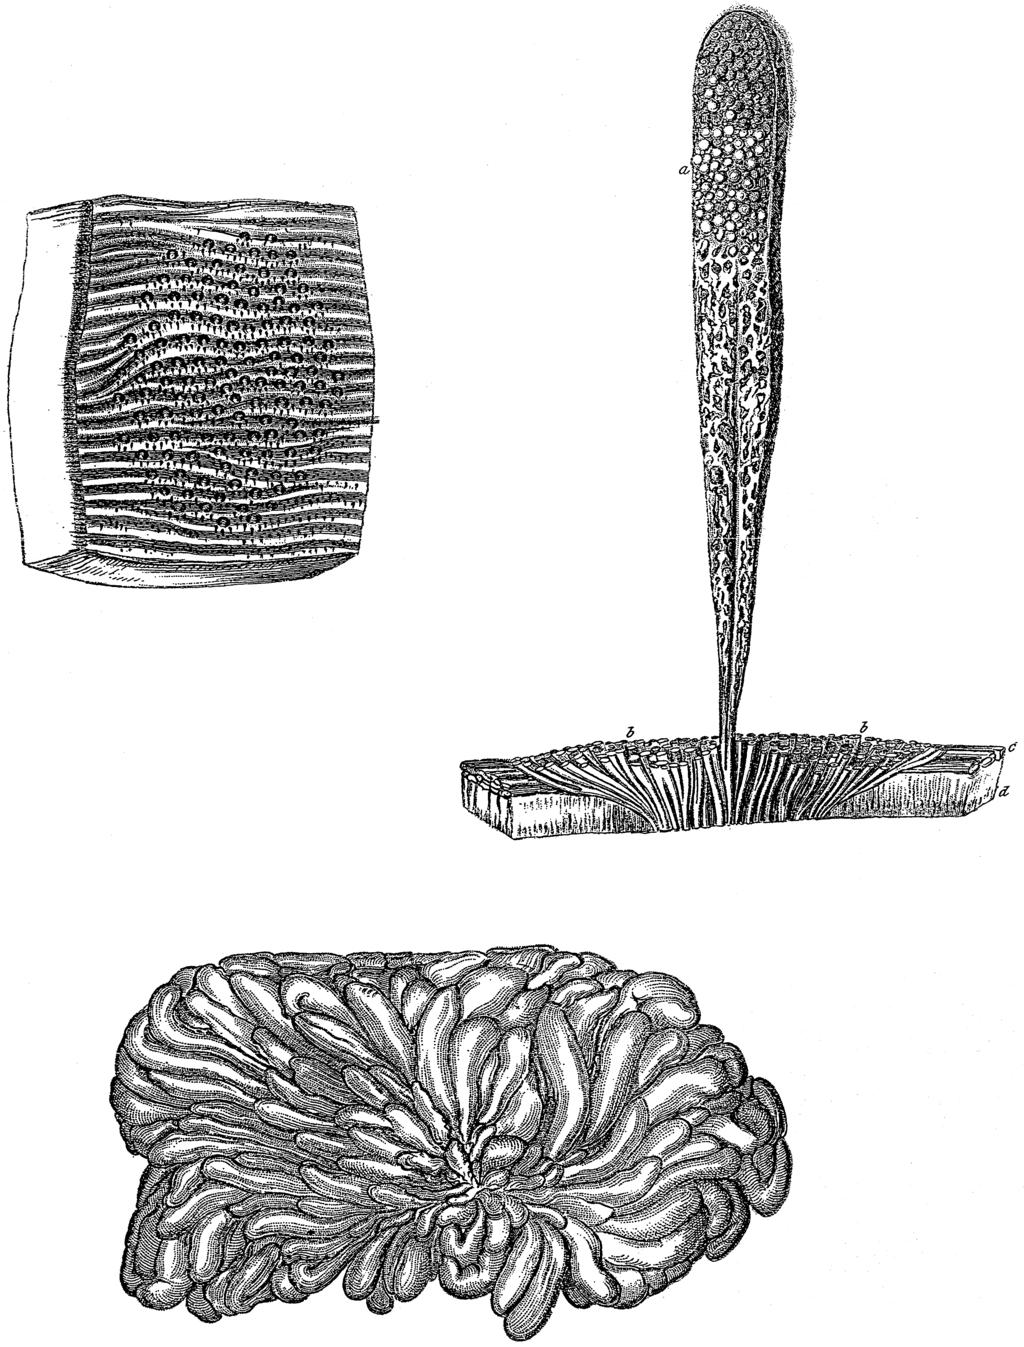 228 Oftedal Fig. 1. The mammary gland of the platypus as illustrated in 1832 by Richard Owen (12).